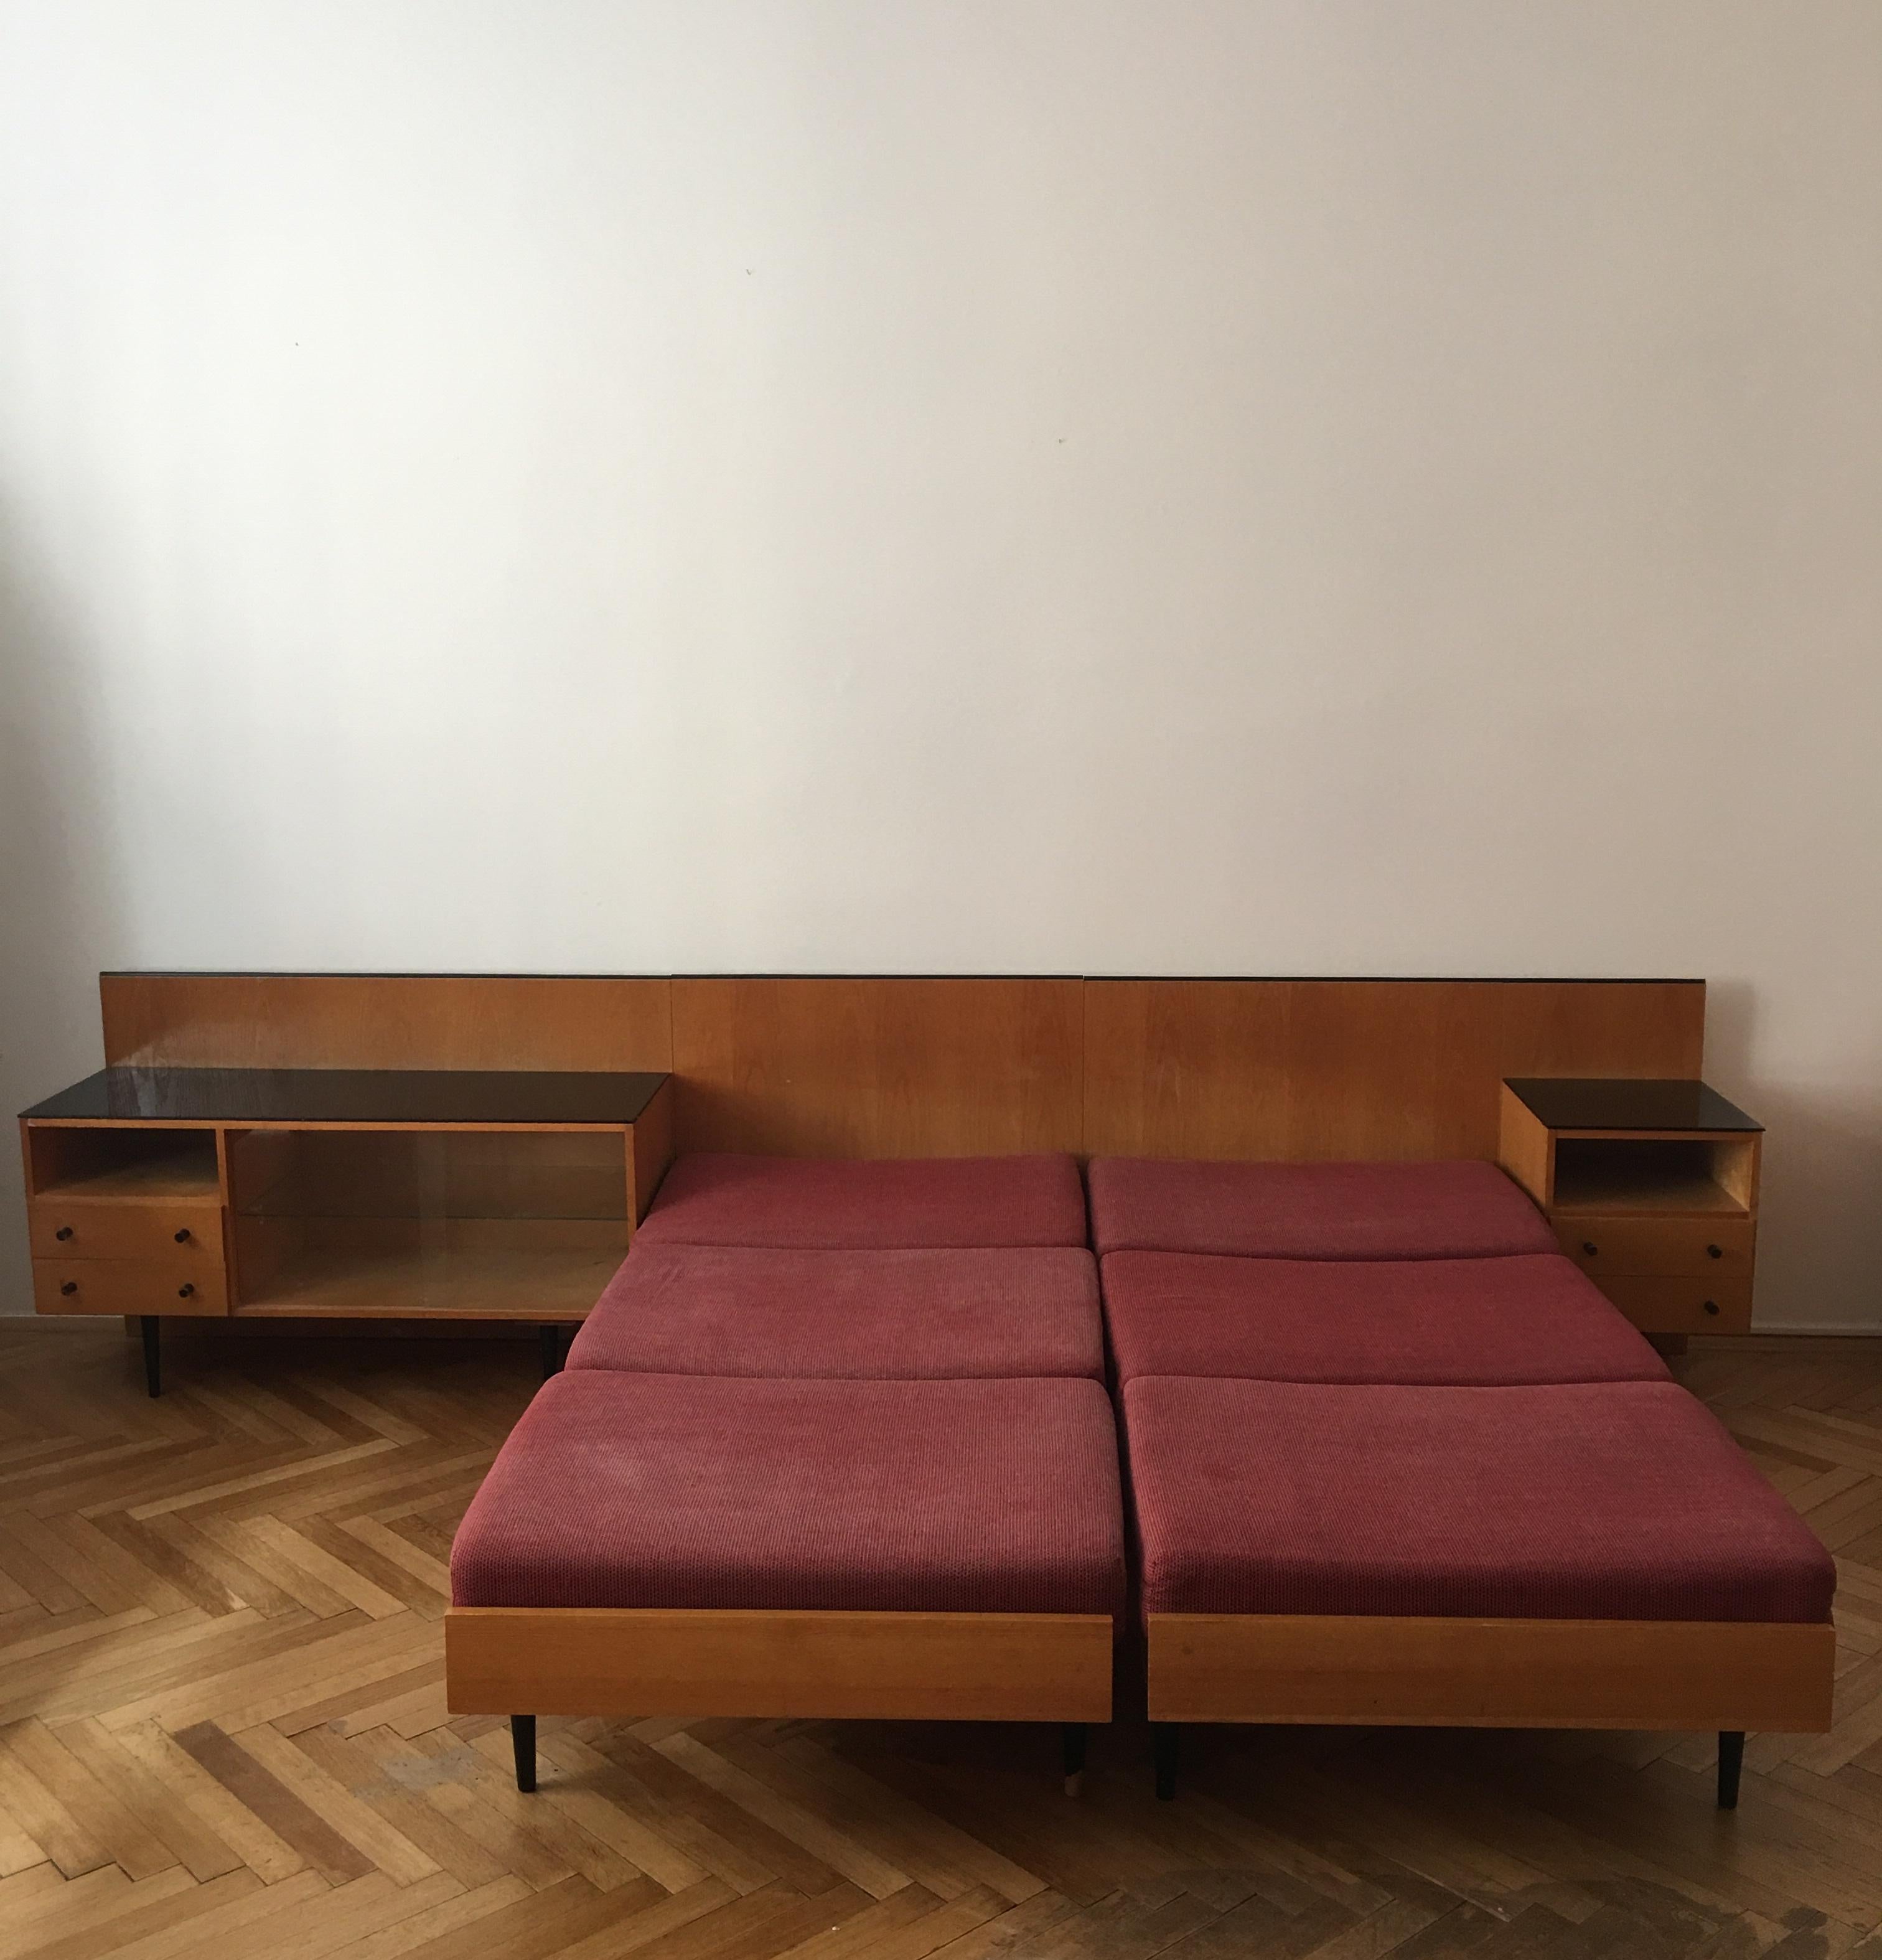 Double bed with nightstands by Mojmir Pozar for UP Zavody, 1960s. In very perfect condition.
Made in Czechoslovakia in 1960s in UP Zavody – Bucovice / Rousinov.
Every piece in middle century had own designer. This item is designed by architect and